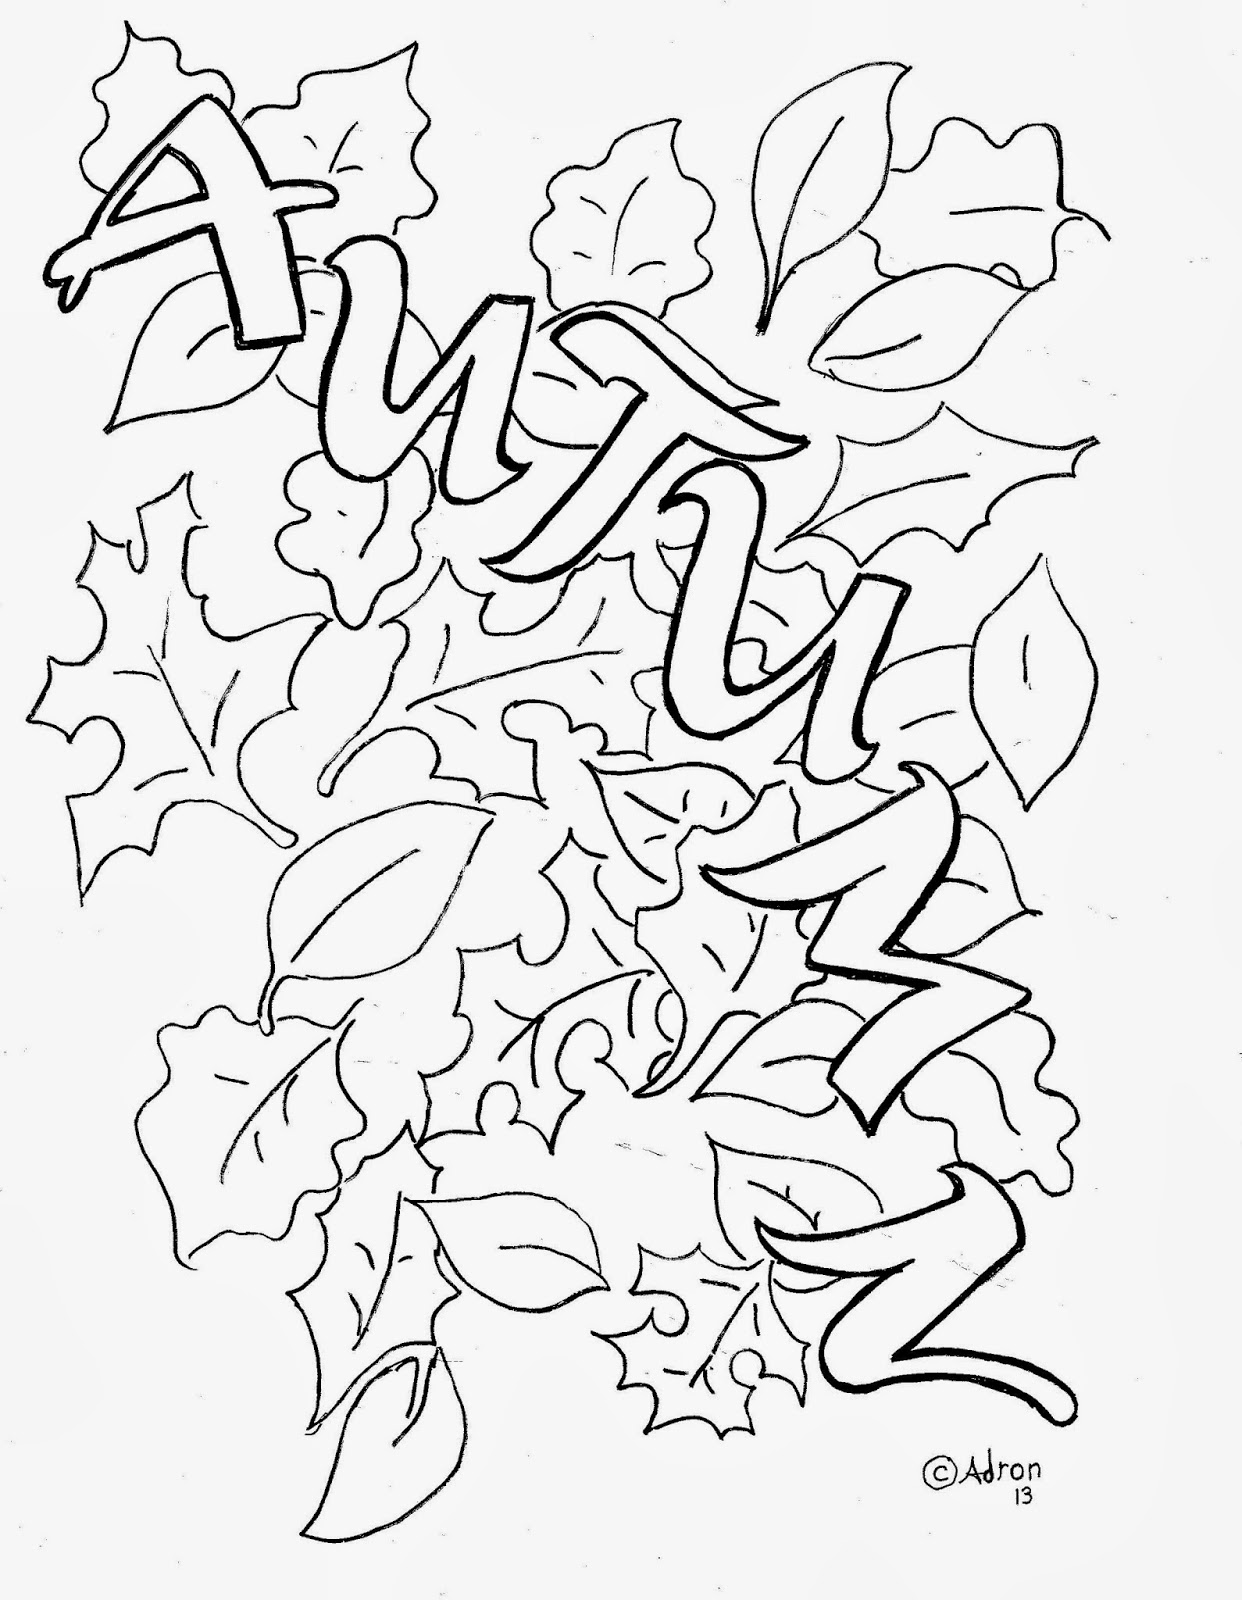 Coloring Pages for Kids by Mr. Adron: Autumn Leaves Coloring Page. Free